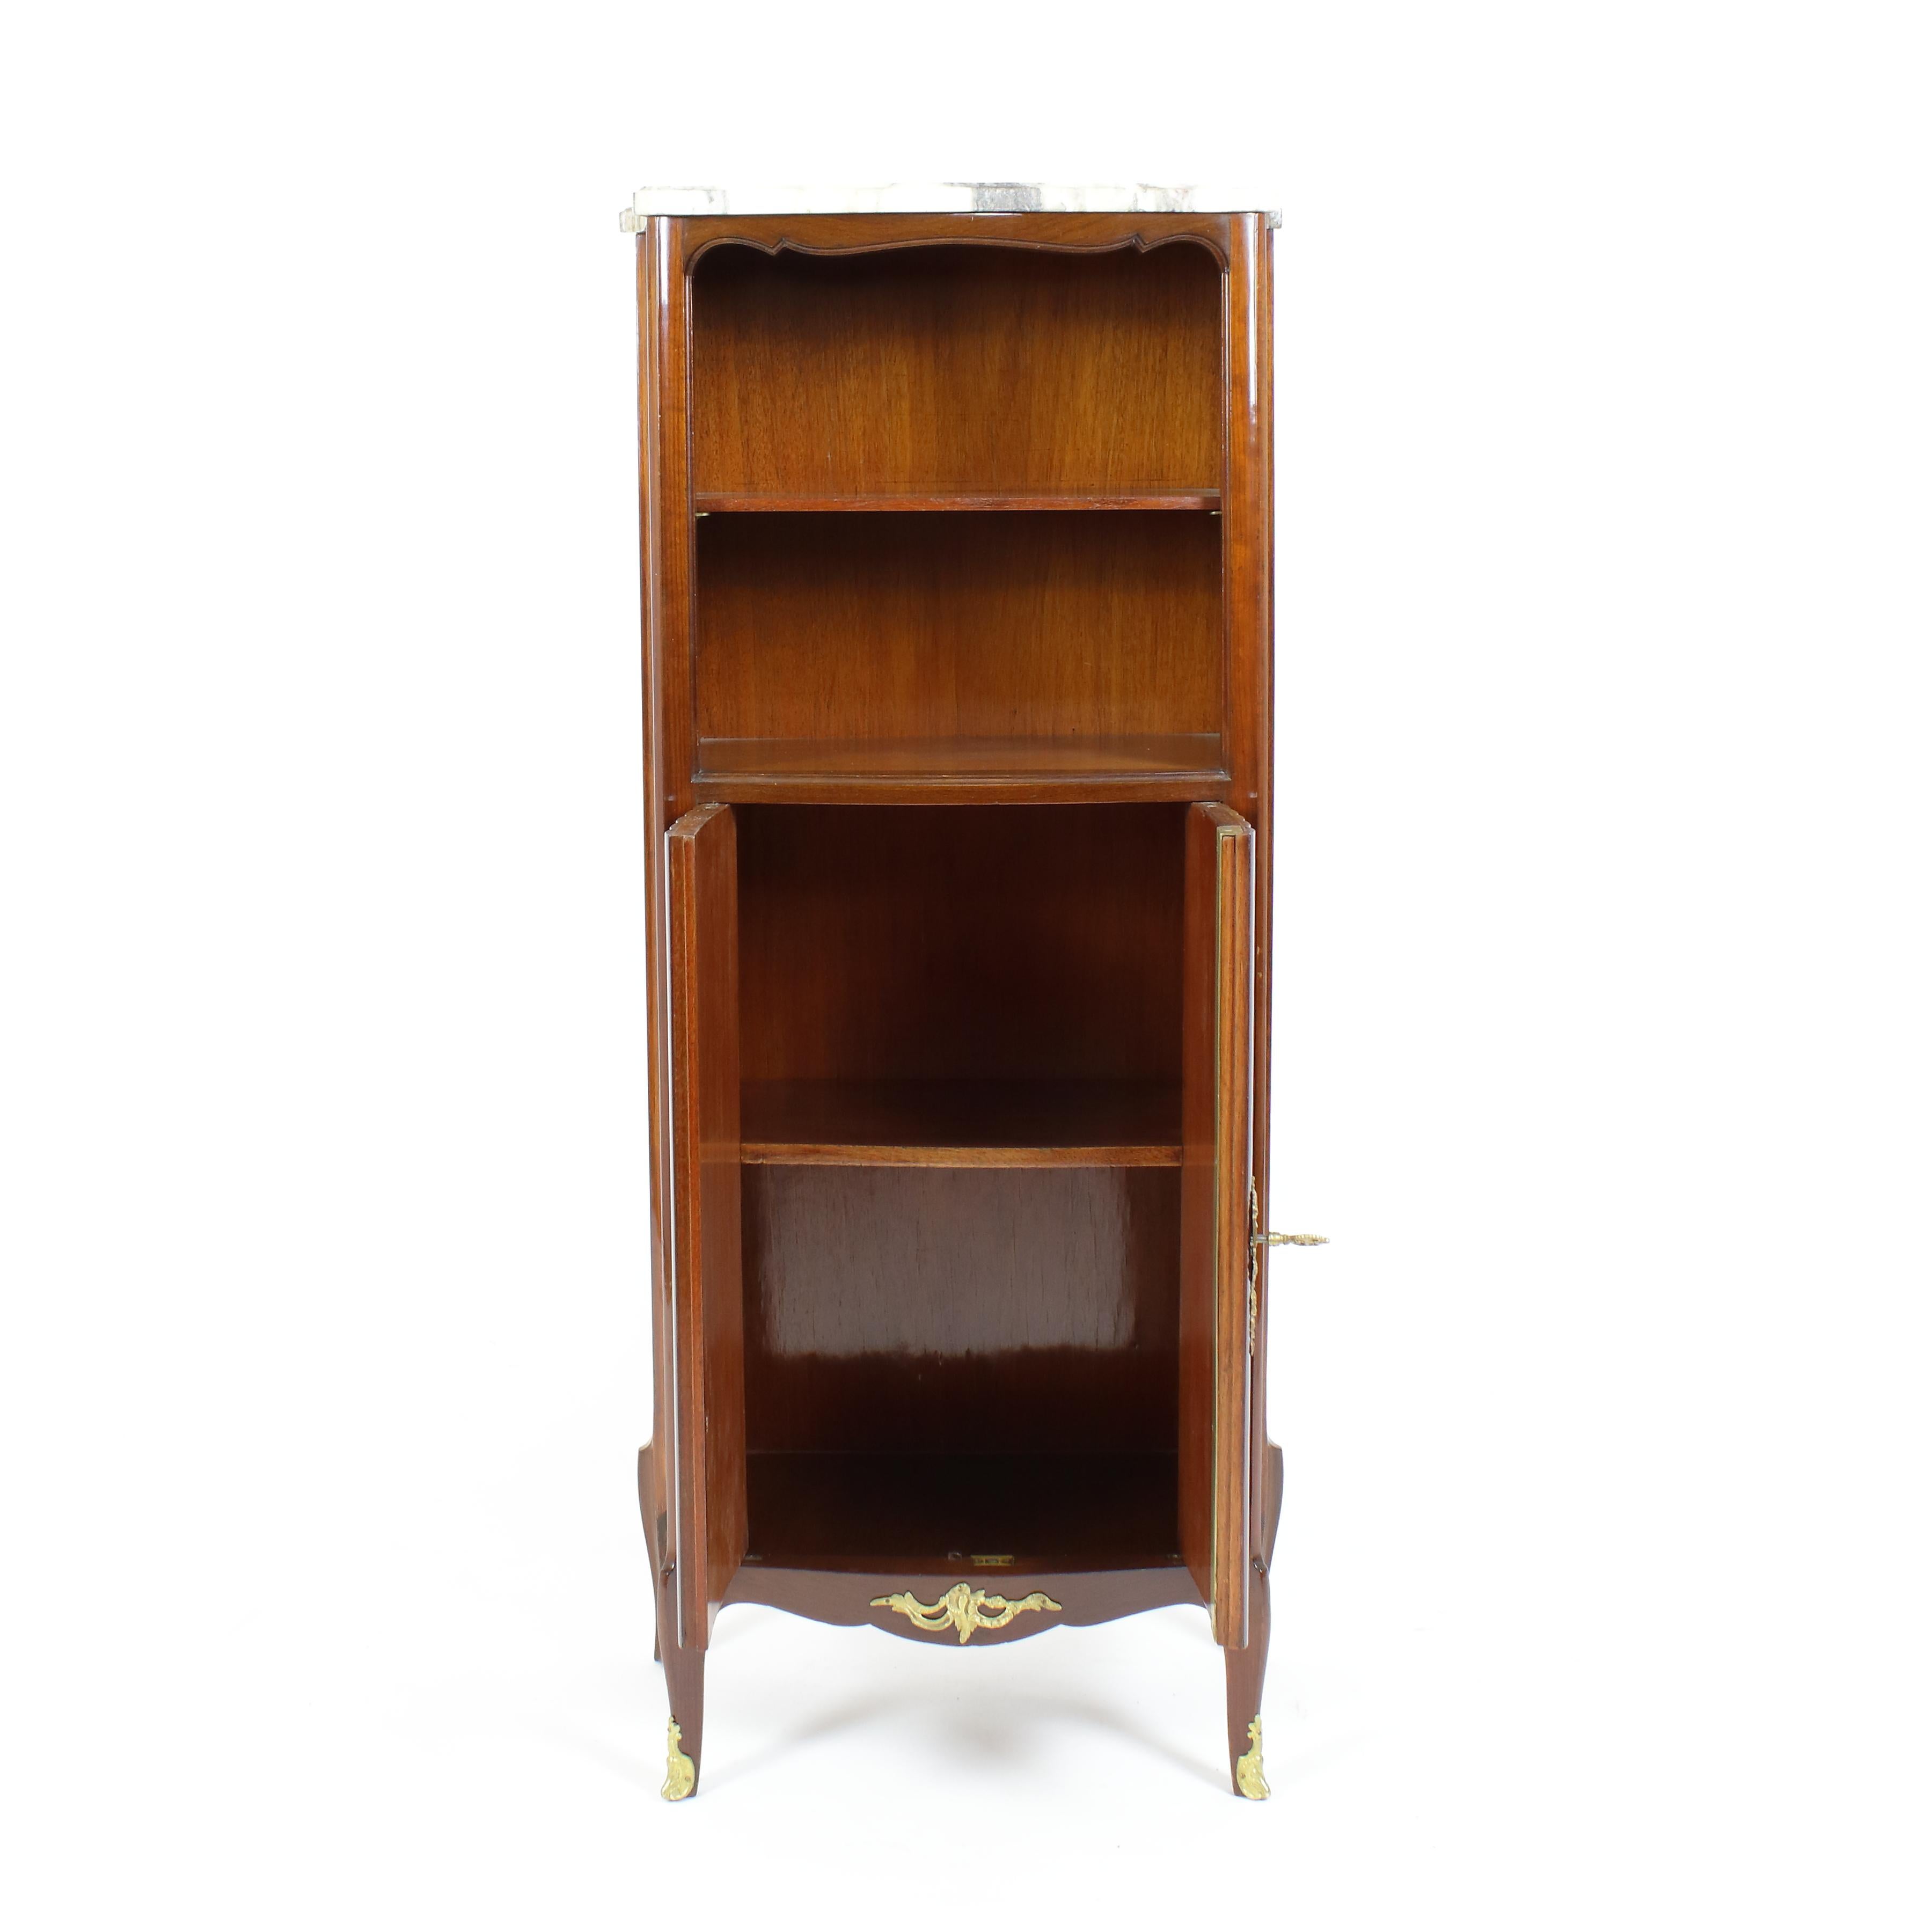 Gilt Late 19th Century French Louis XV Transition Tall Boy or Shelf For Sale